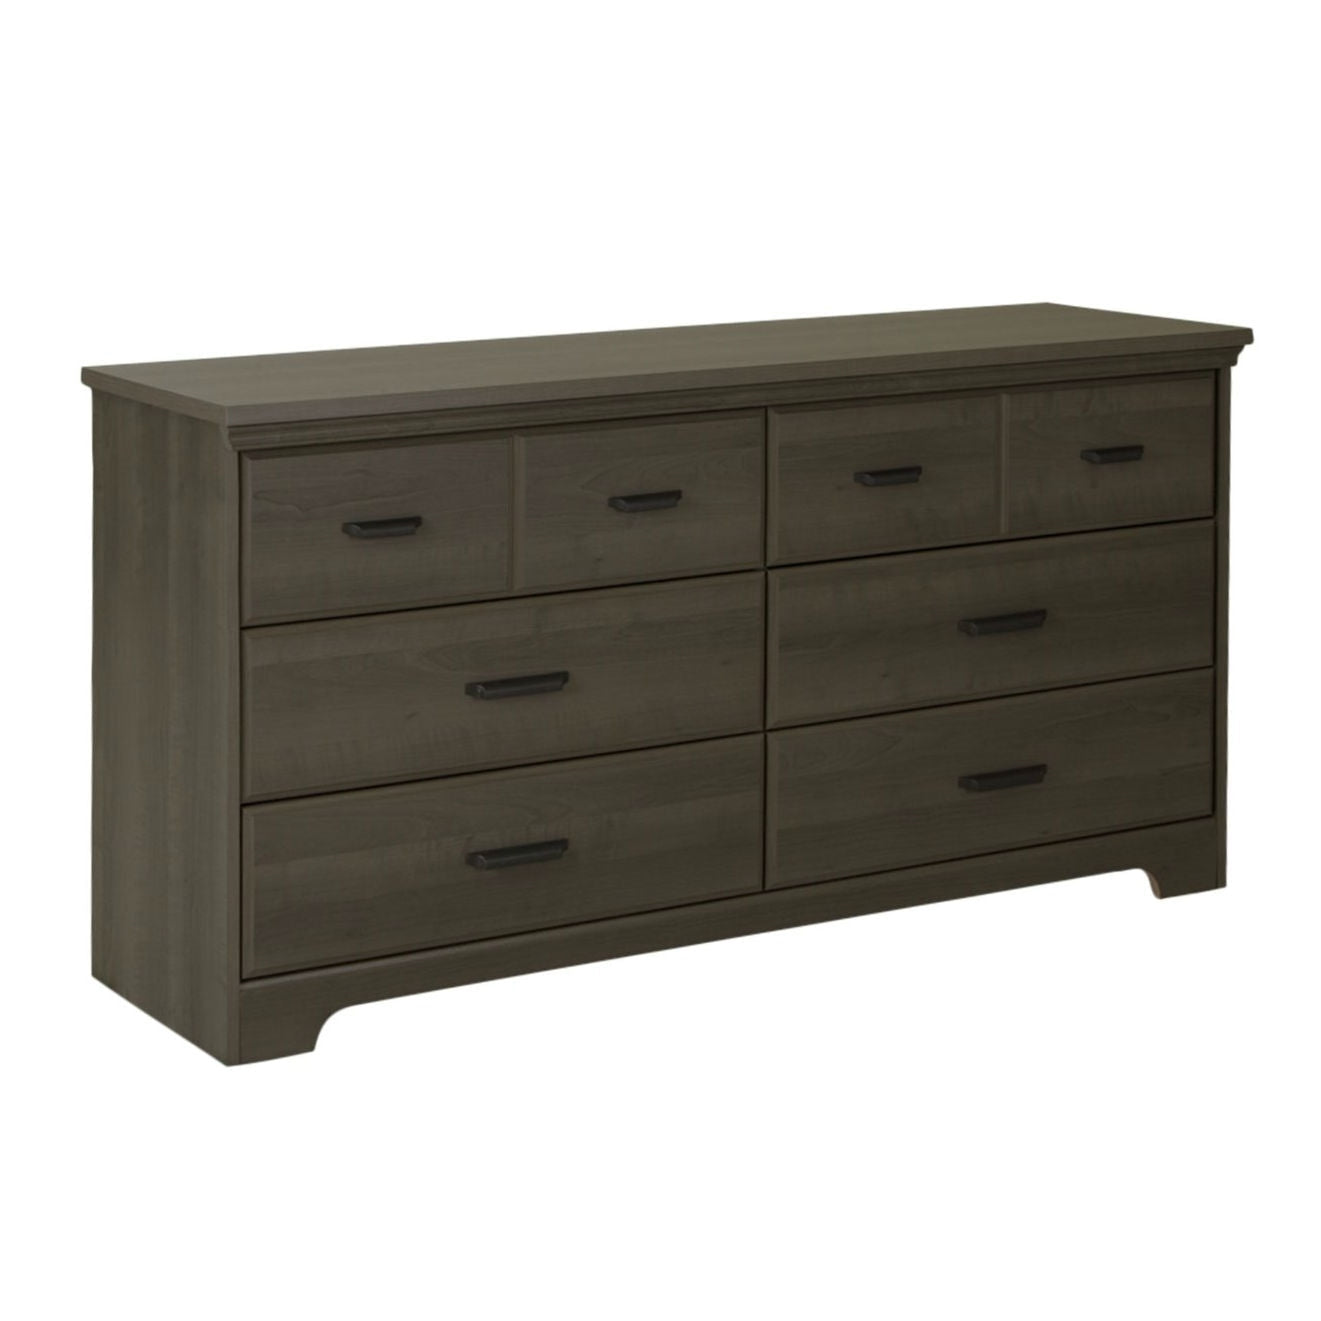 Bedroom > Nightstand And Dressers - Bedroom 6-Drawer Double Dresser Wardrobe Cabinet In Grey Maple Finish